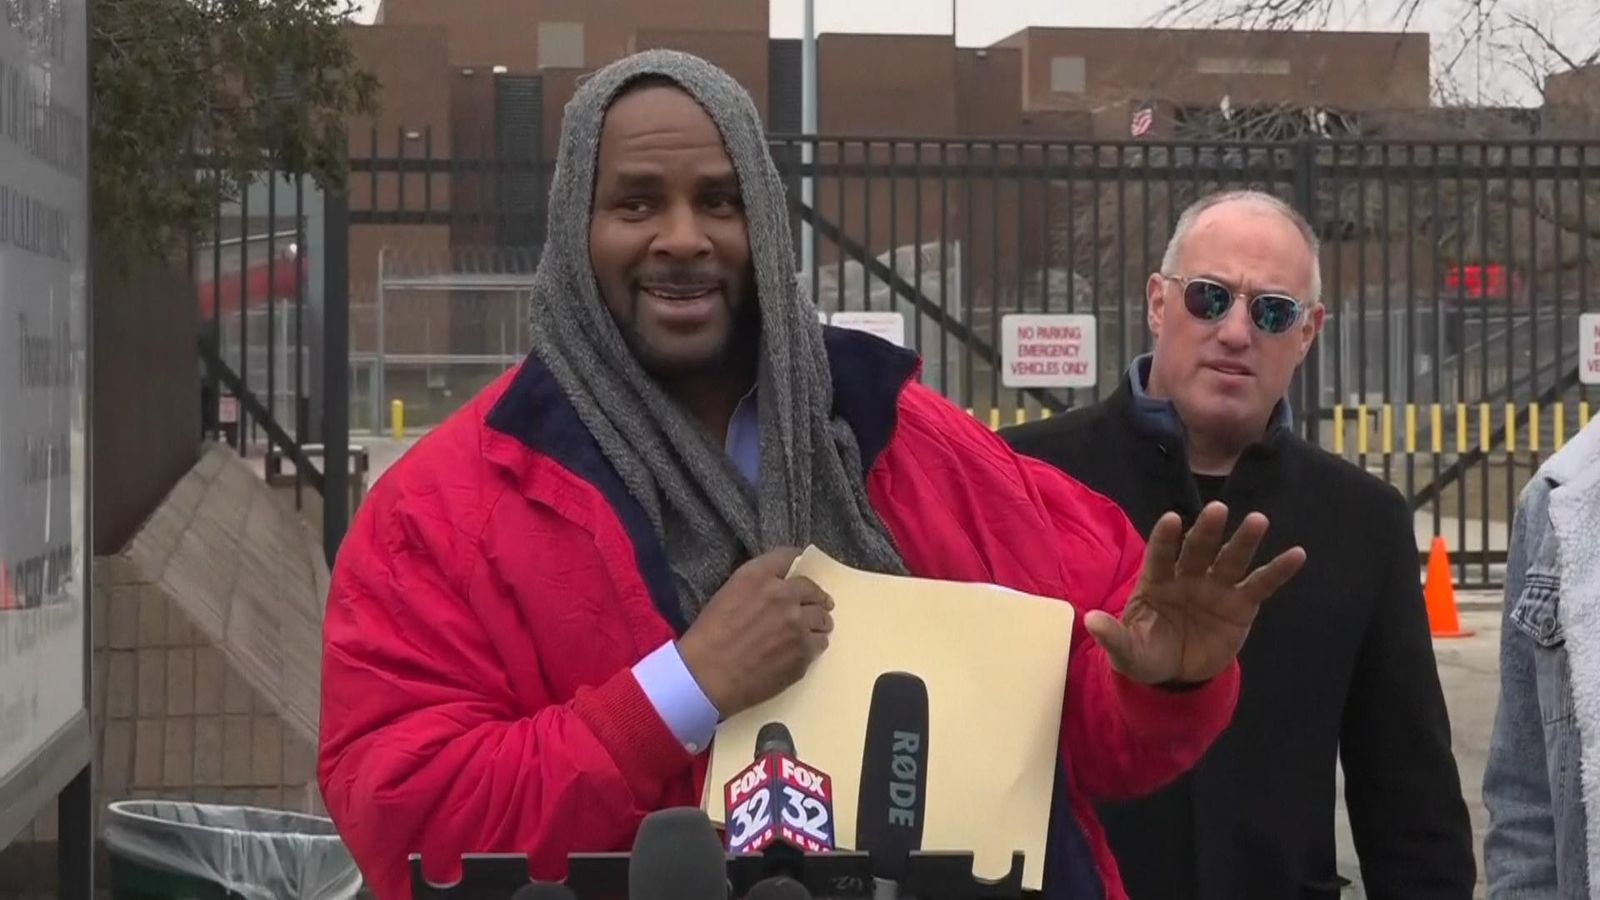 R Kelly Singer released from US jail after 'someone' pays 161,000